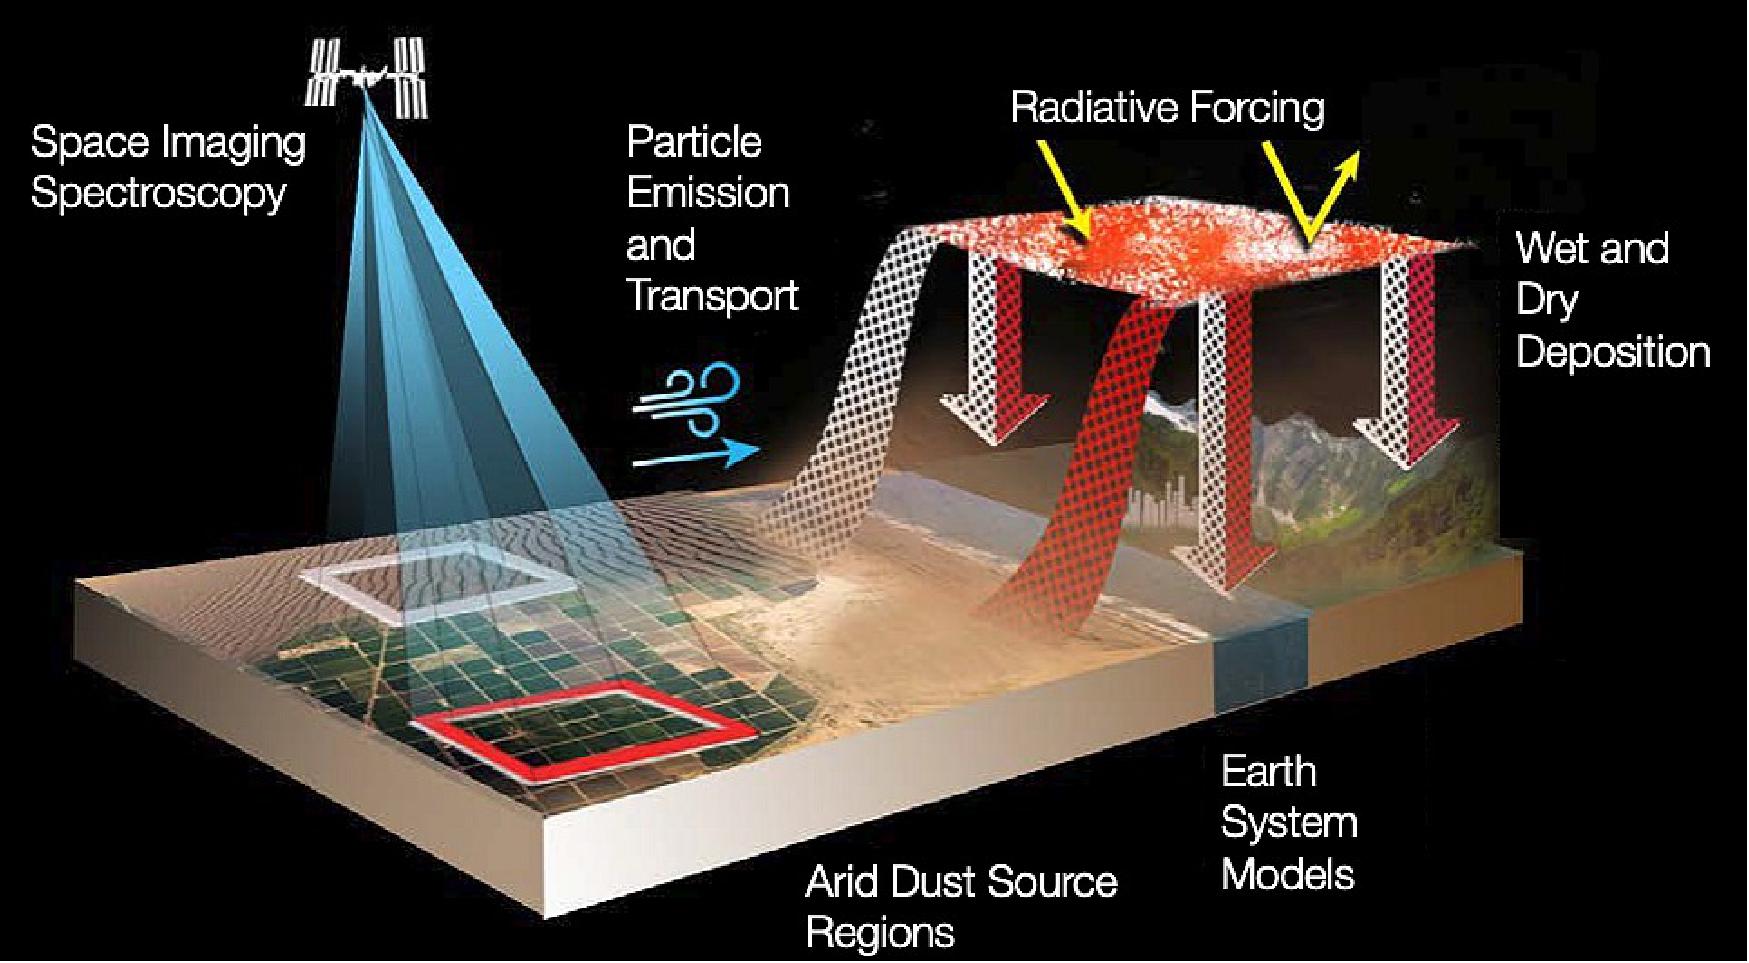 Figure 1: Mineral dust blown into the air is an important part of the Earth system. Wind blows dust into the atmosphere from desert regions around the world, and can carry dust across oceans. Dark minerals that absorb sunlight can warm the Earth, while light-colored minerals can cool the Earth. By accurately mapping the composition of areas that produce mineral dust, EMIT will advance our understanding of dust’s effects throughout the Earth system and to human populations now and in the future (image credit: NASA)